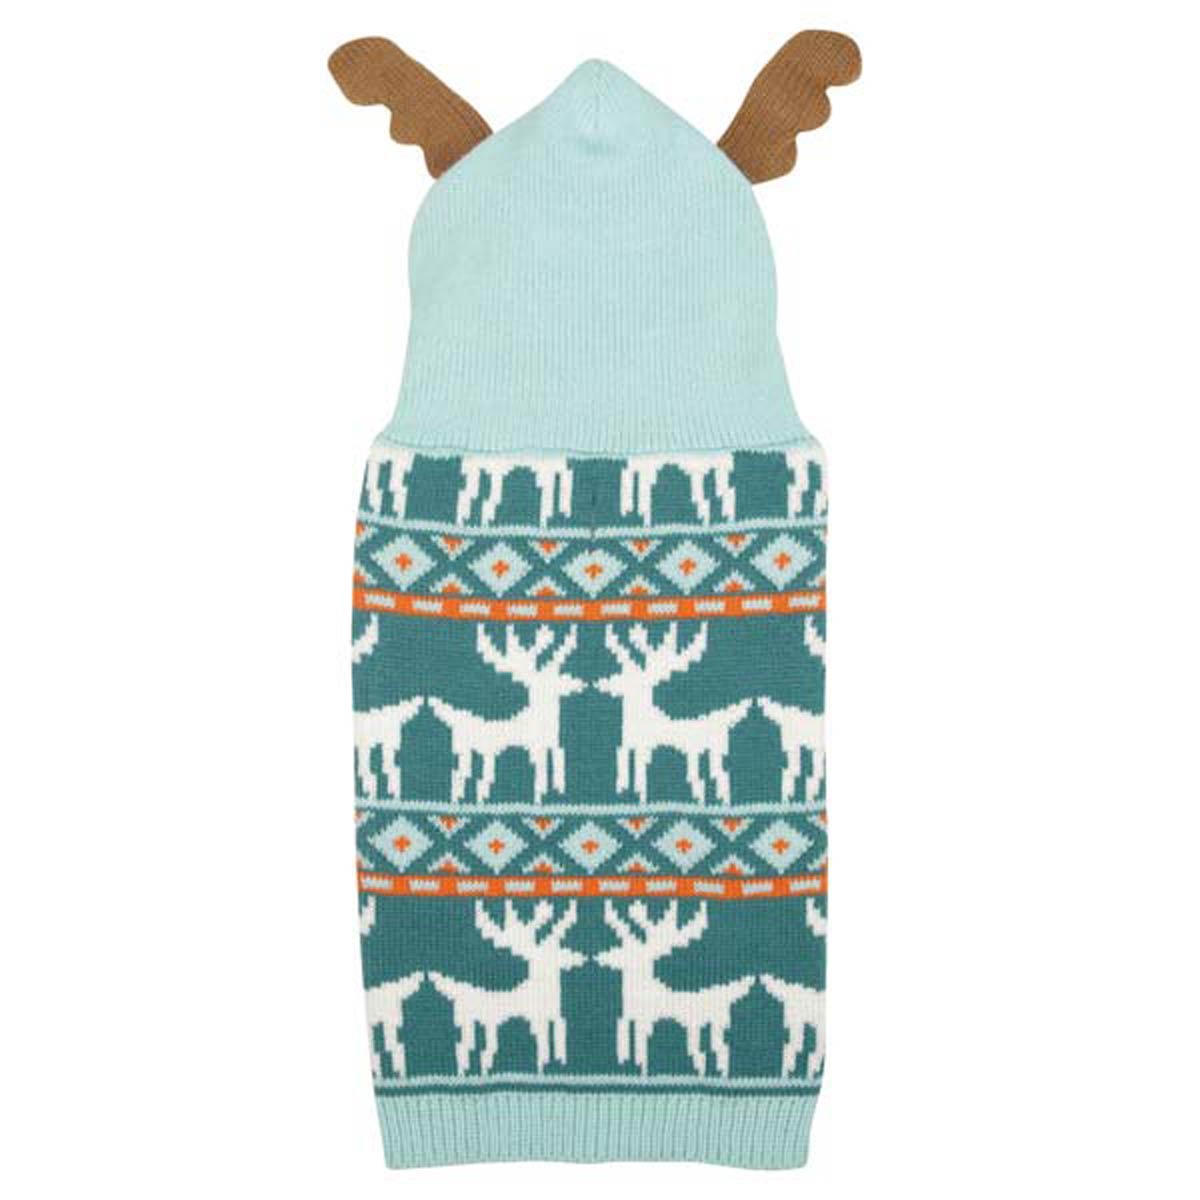 Y Ue975 10 19 Elements Antler Dog Sweater, Teal - Extra Small